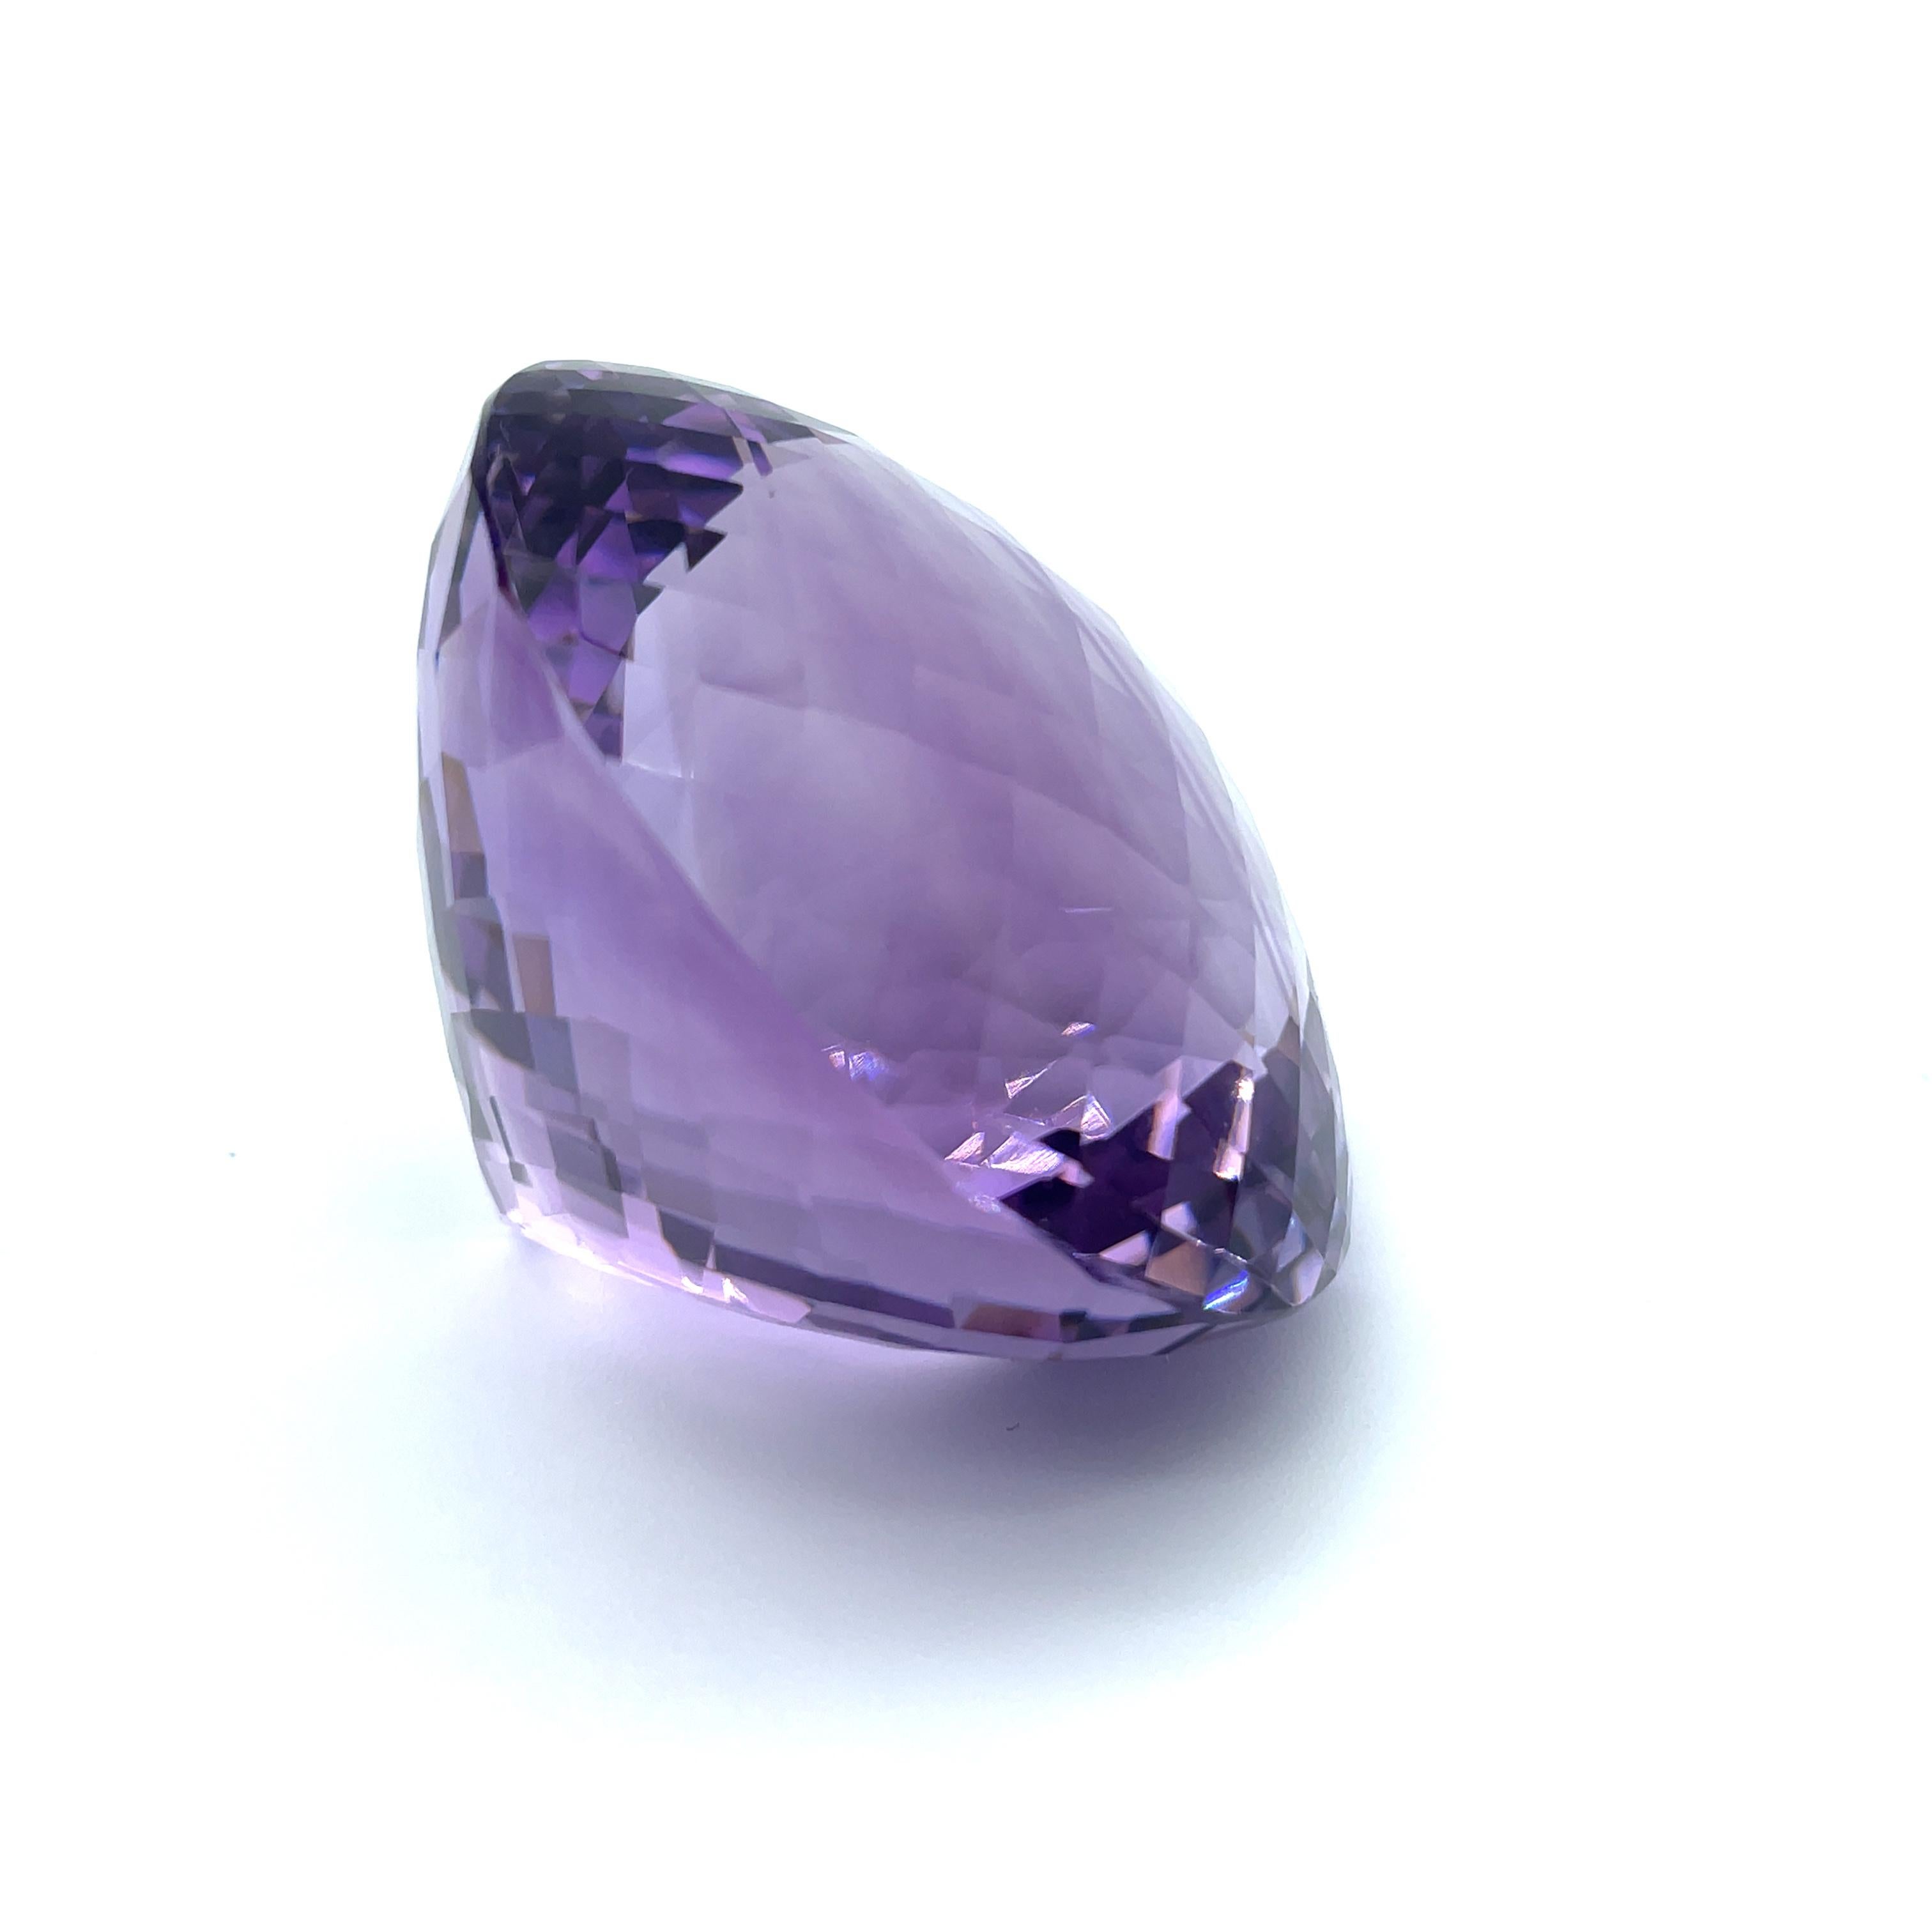 Round Cut 651 Carat Round Faceted Checkerboard Amethyst Collector Gemstone  For Sale